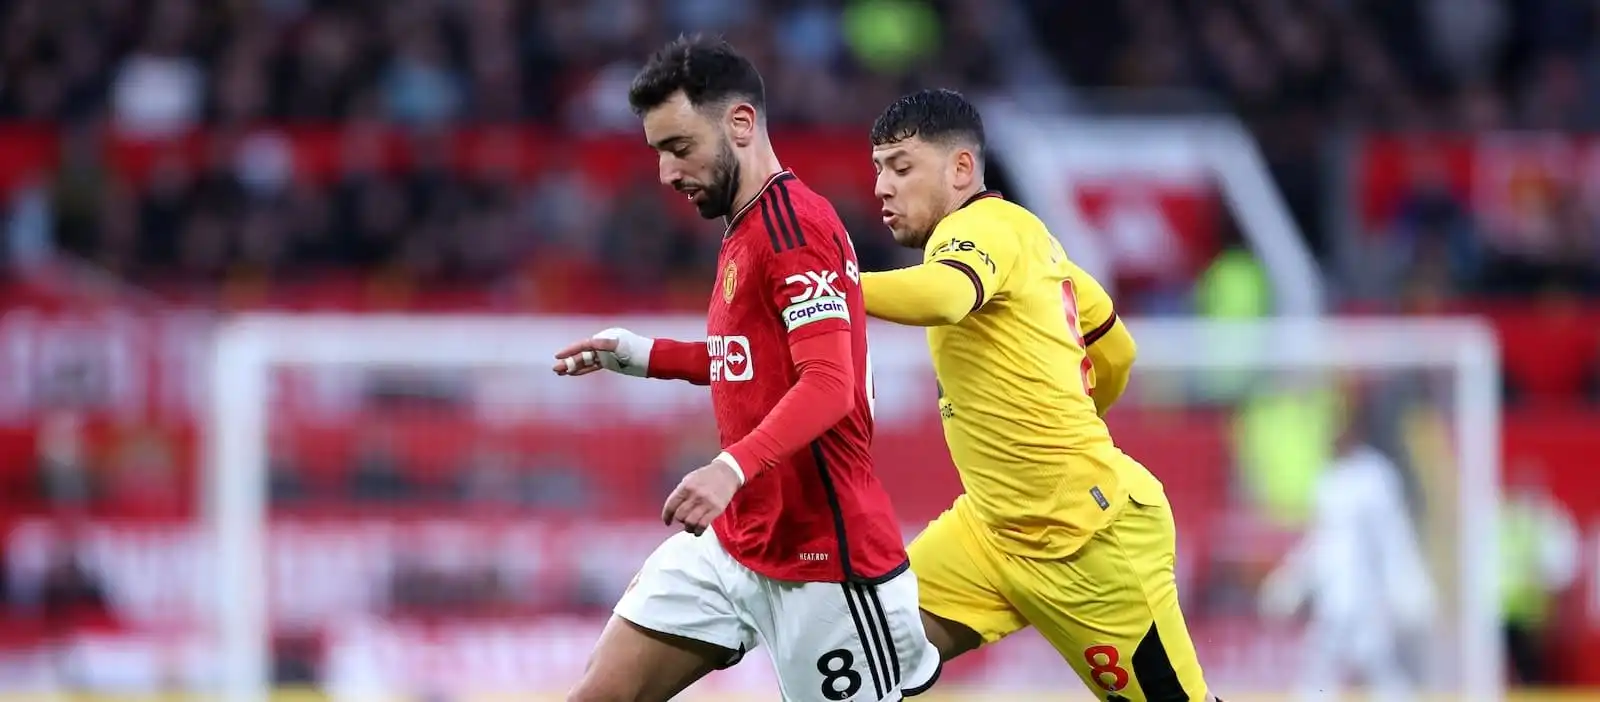 Manchester United vs Sheffield United - Match Report, Man United News and Transfer News